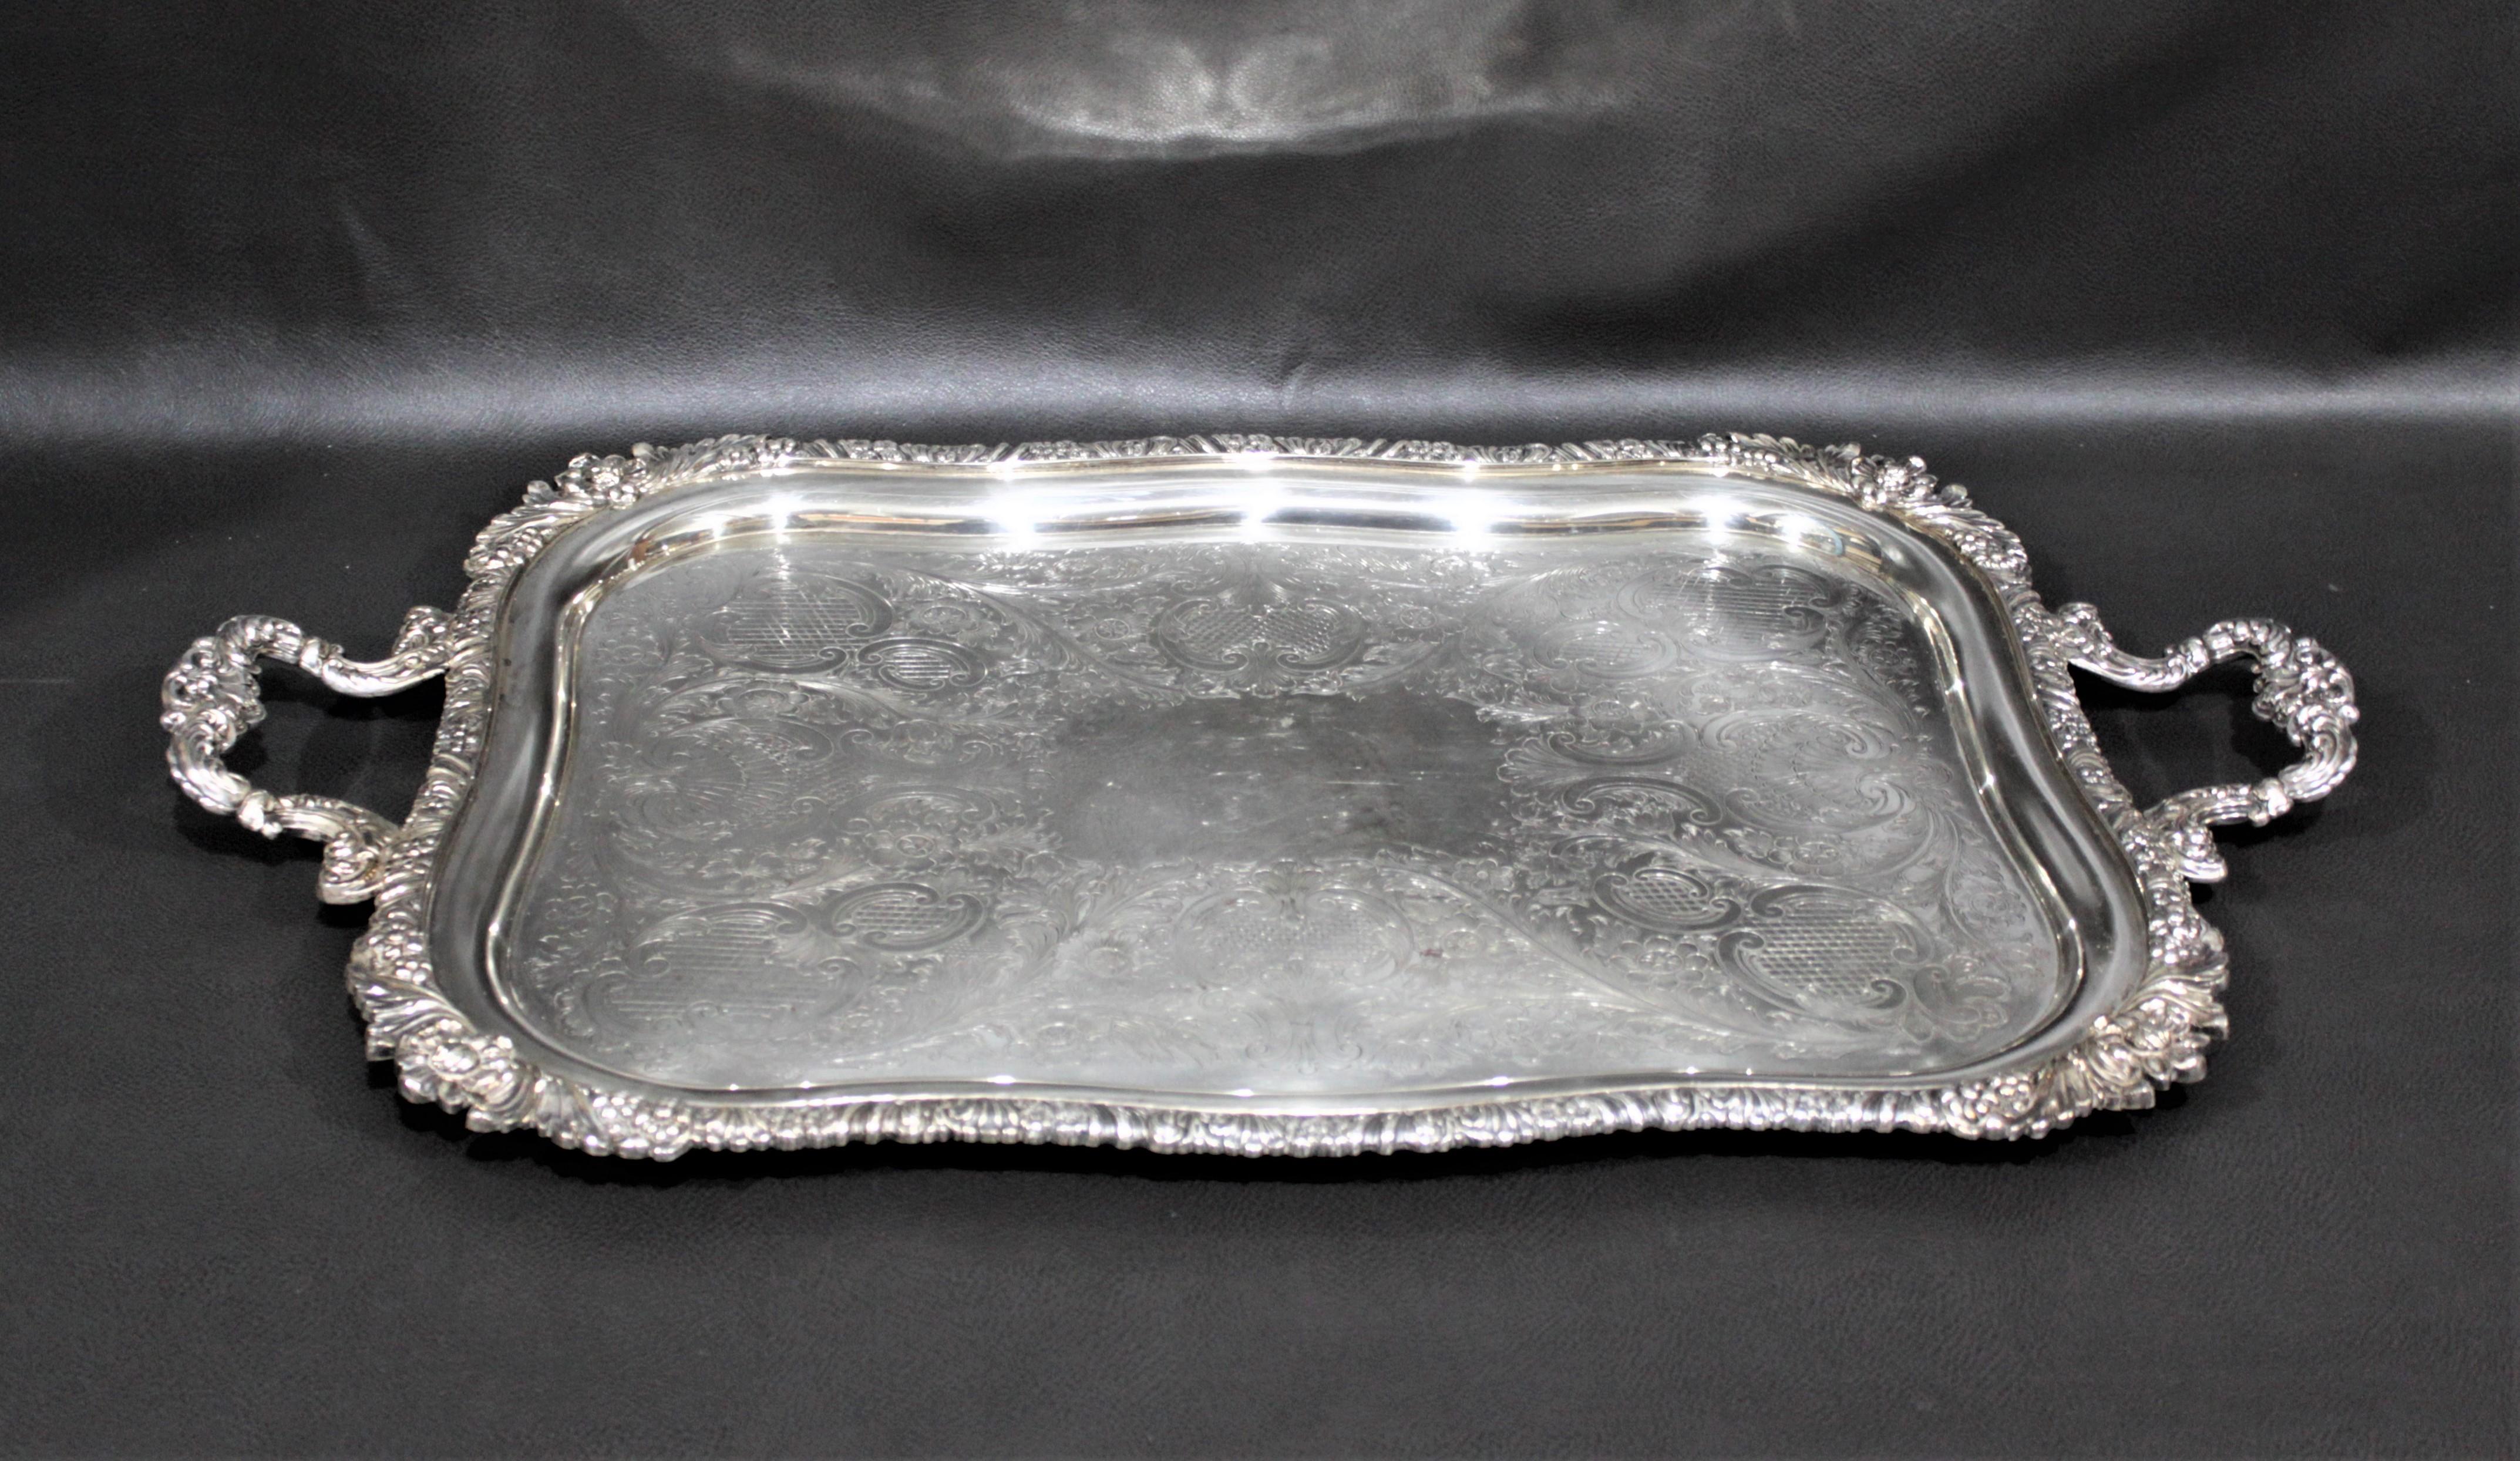 Reticulated Tray Vintage Silverplated Tray Leonard Silverplated Tray Serving Tray Decorative Silverplated Tray Traditional Decor